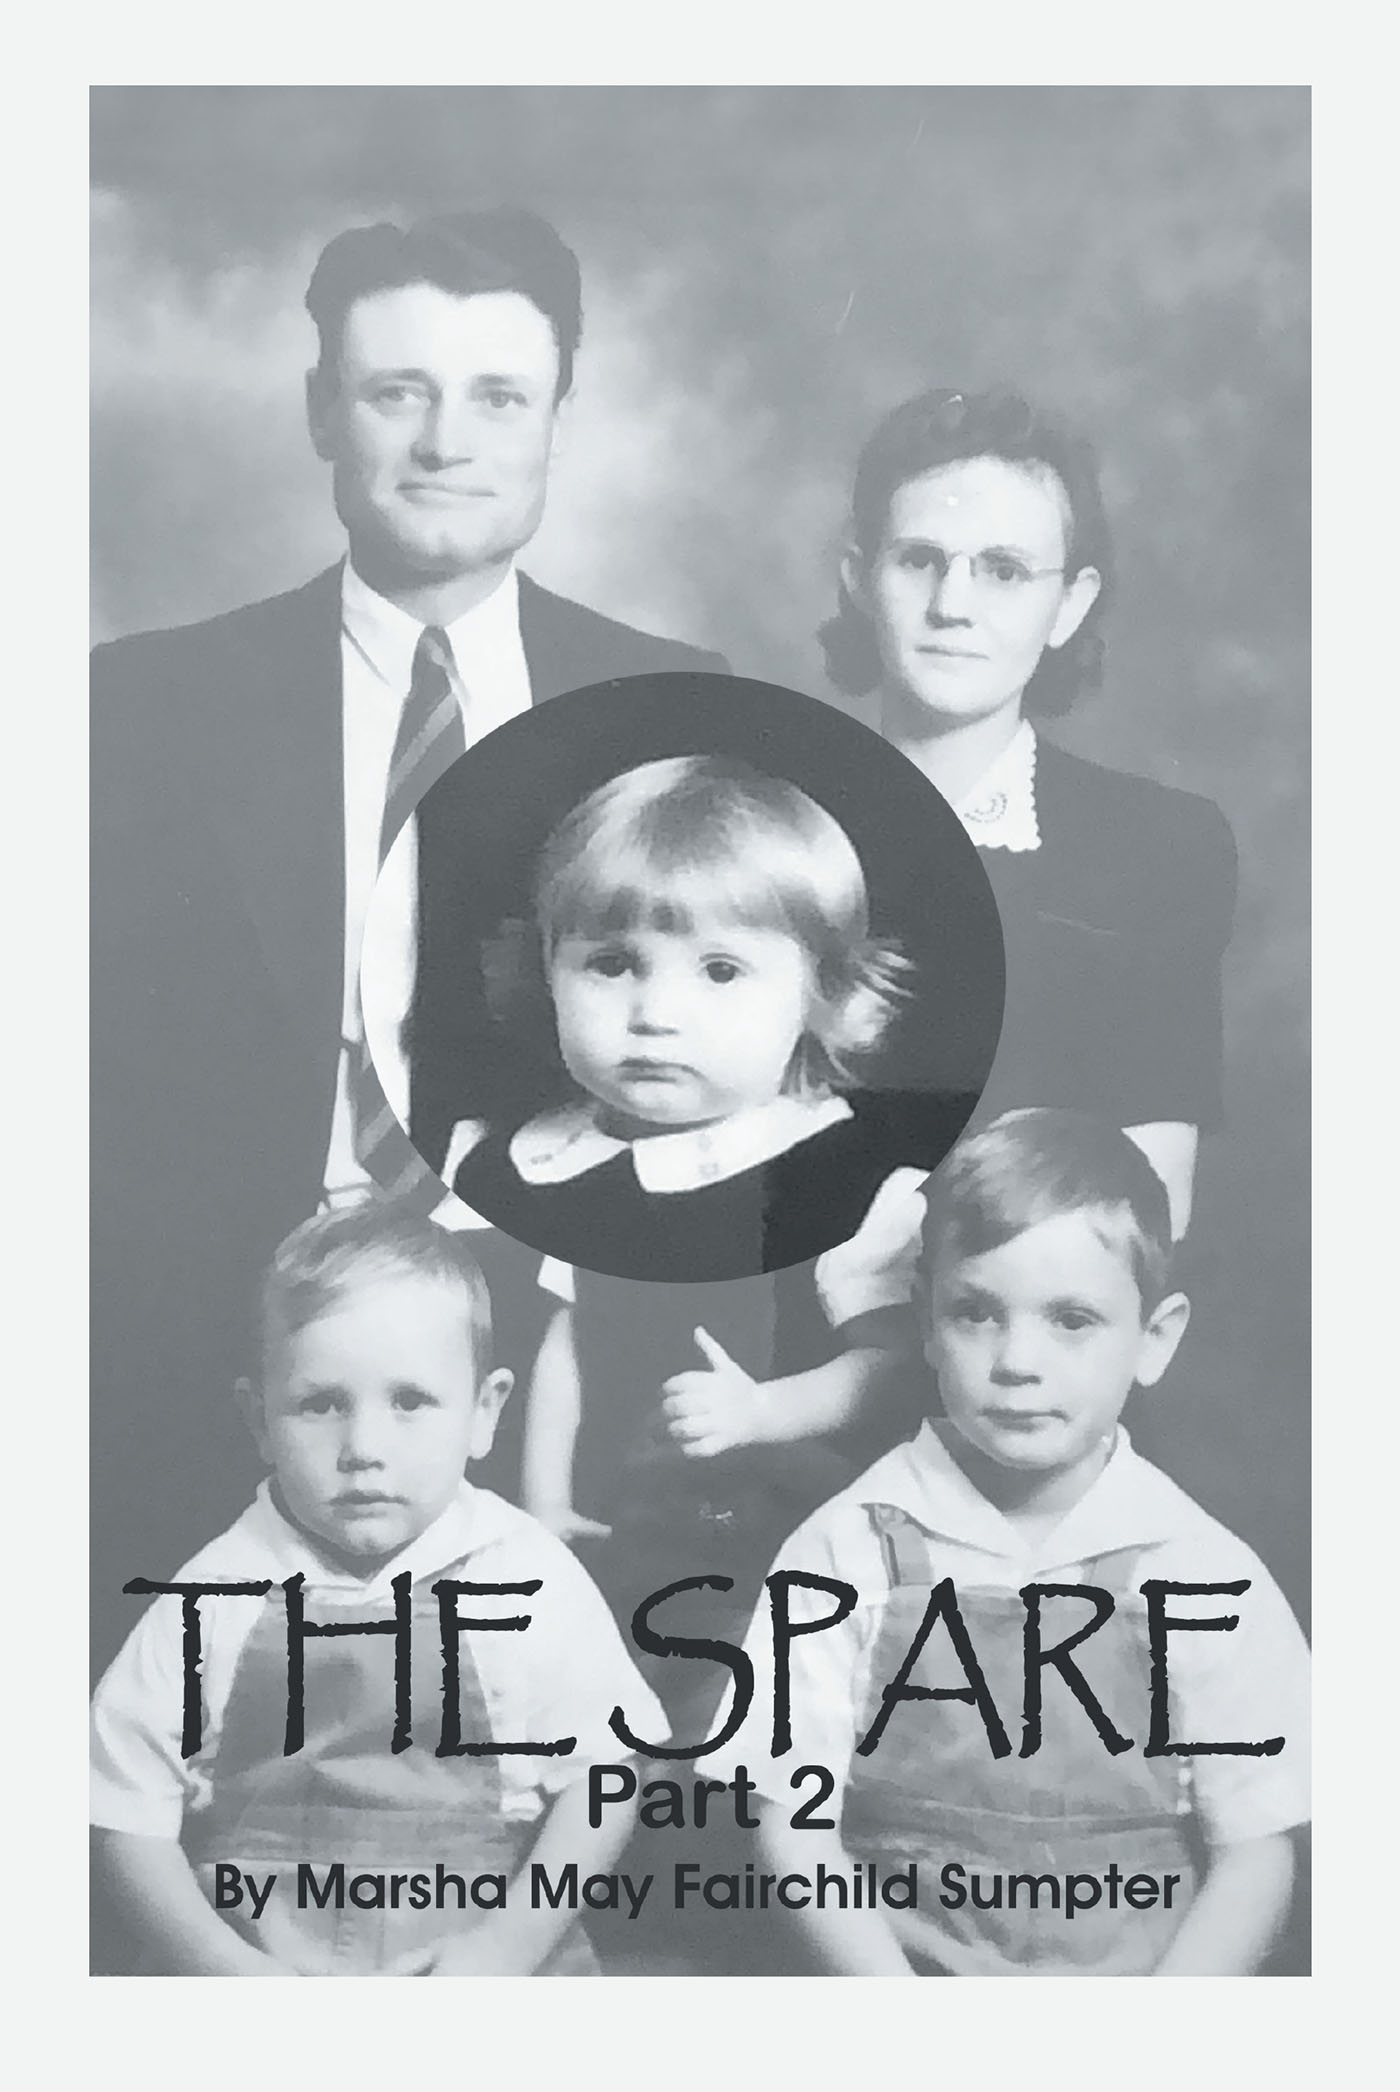 Author Marsha May Fairchild Sumpter’s New Book, "The Spare: Part 2," is the Riveting Continuation of the Author’s Revealing, Emotionally Raw Autobiography